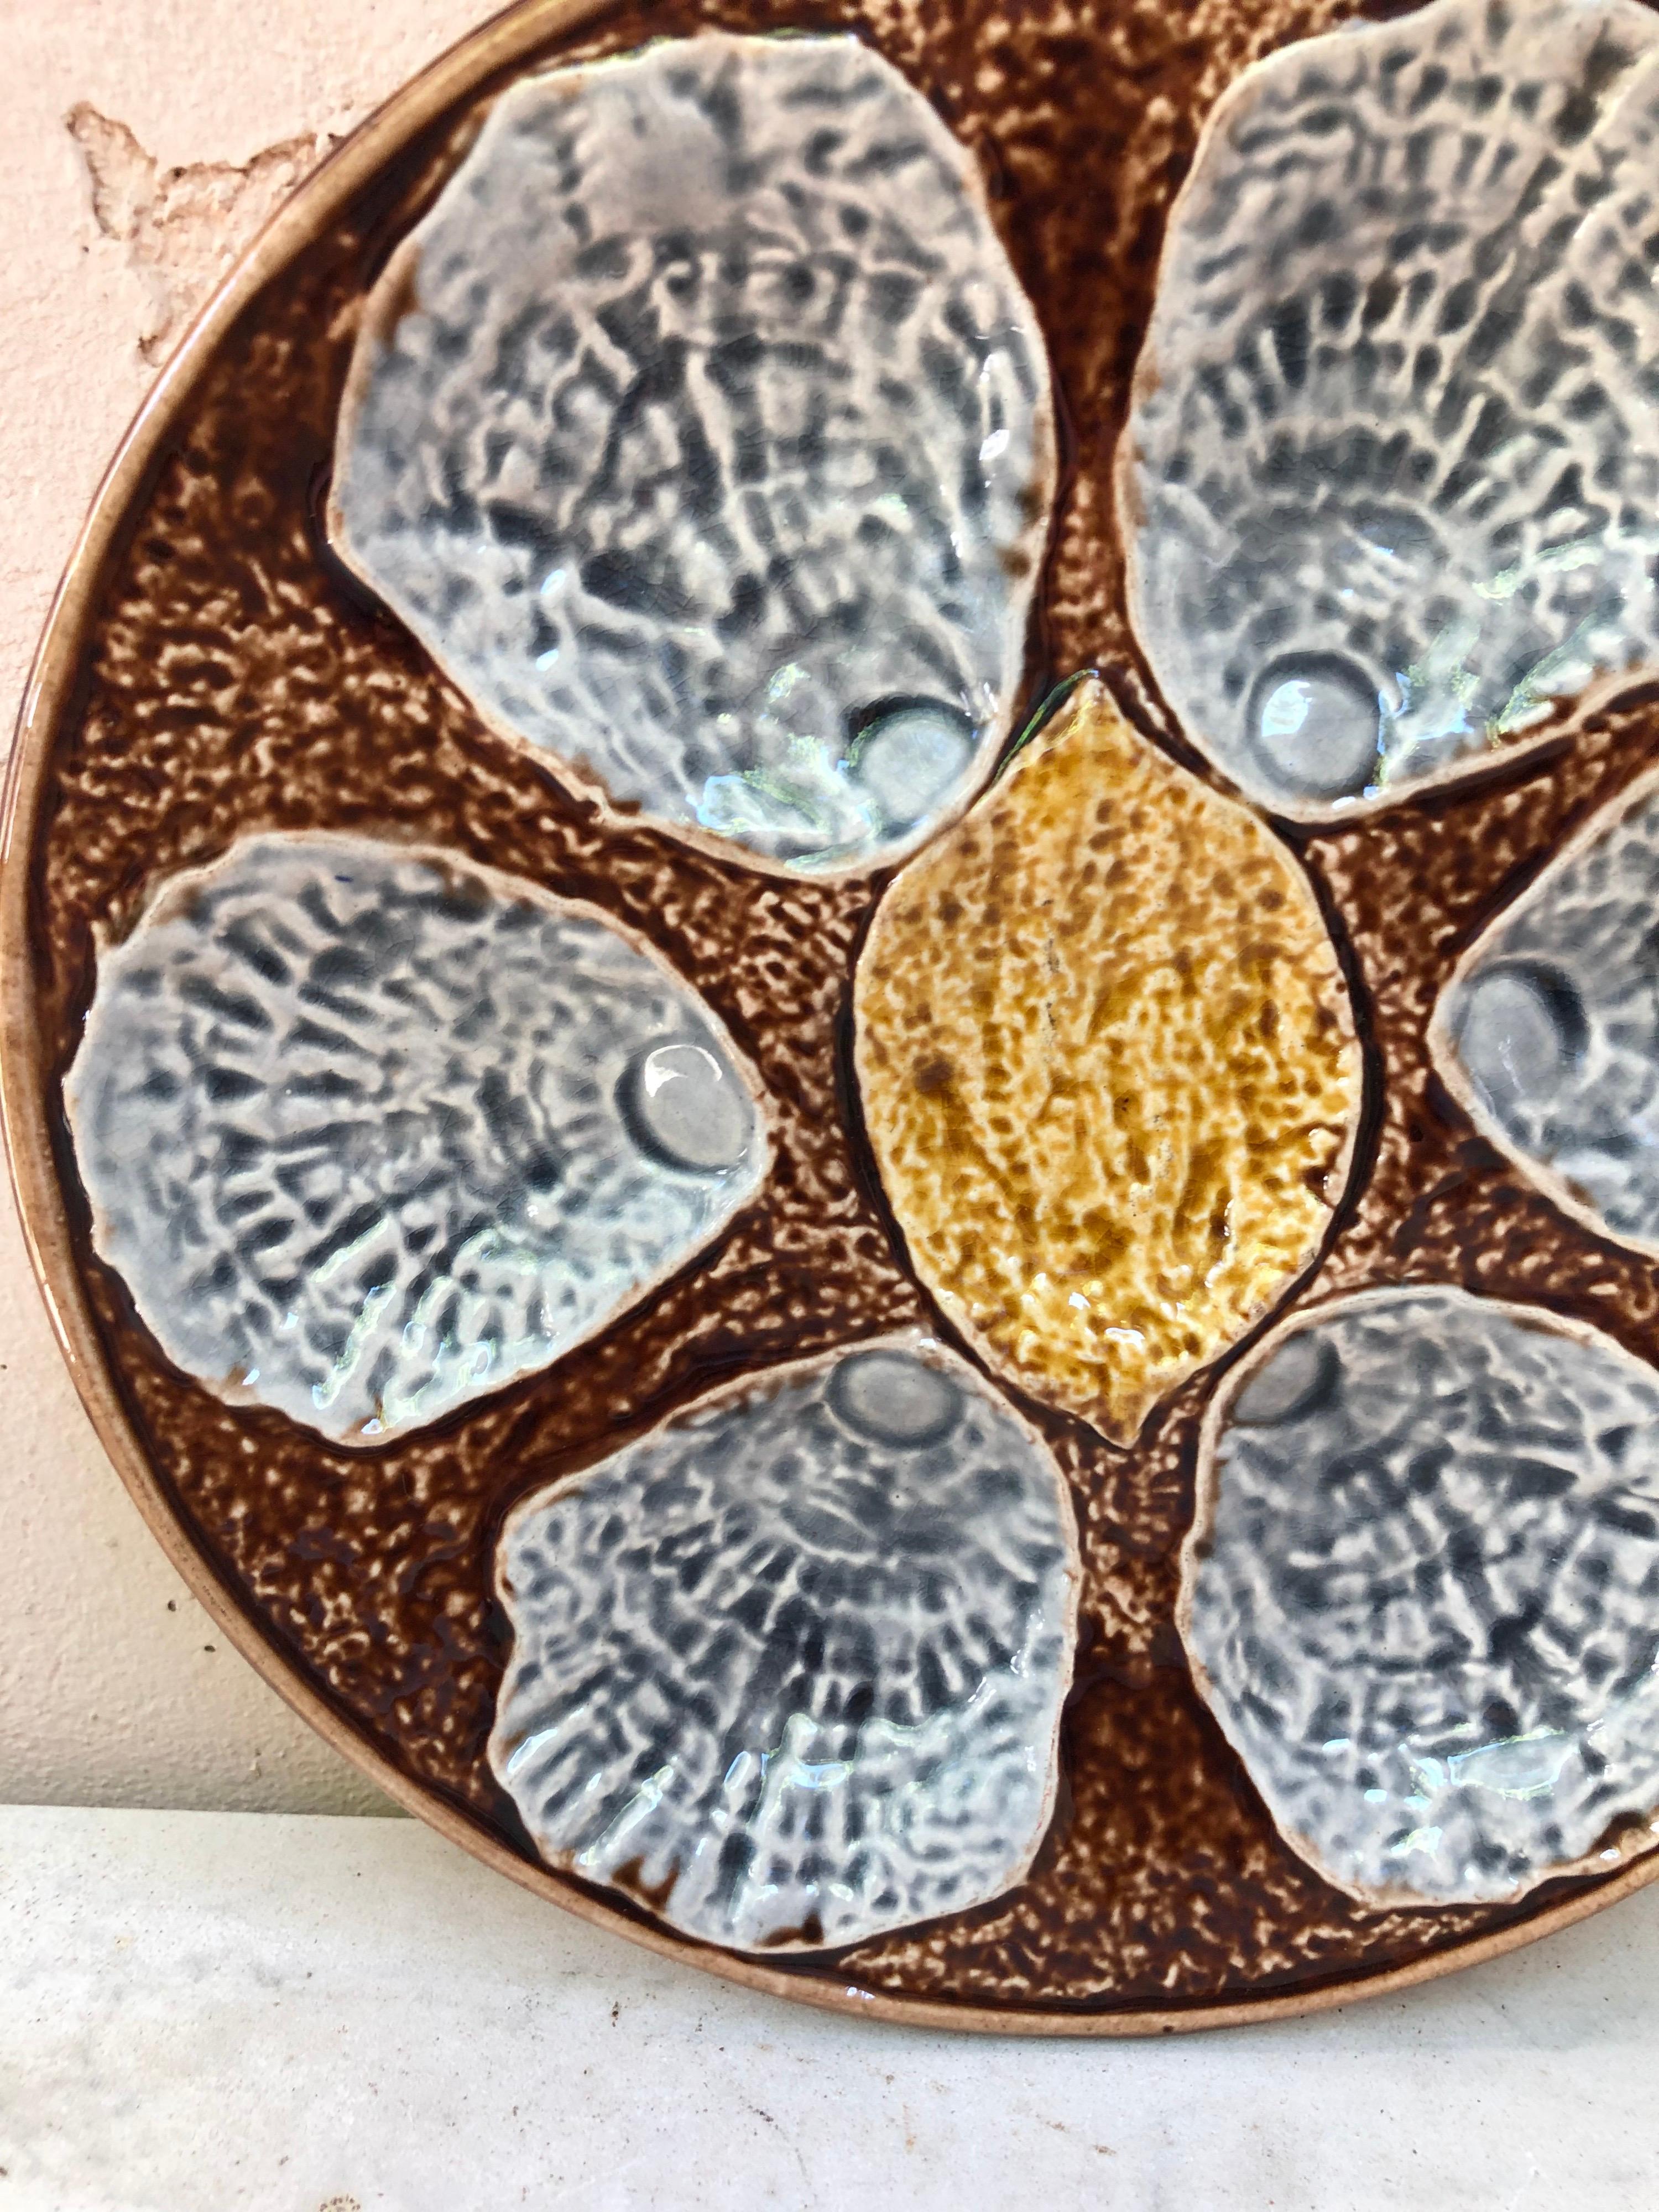 19th century French Majolica Oyster plate unsigned, with a lemon on the center.